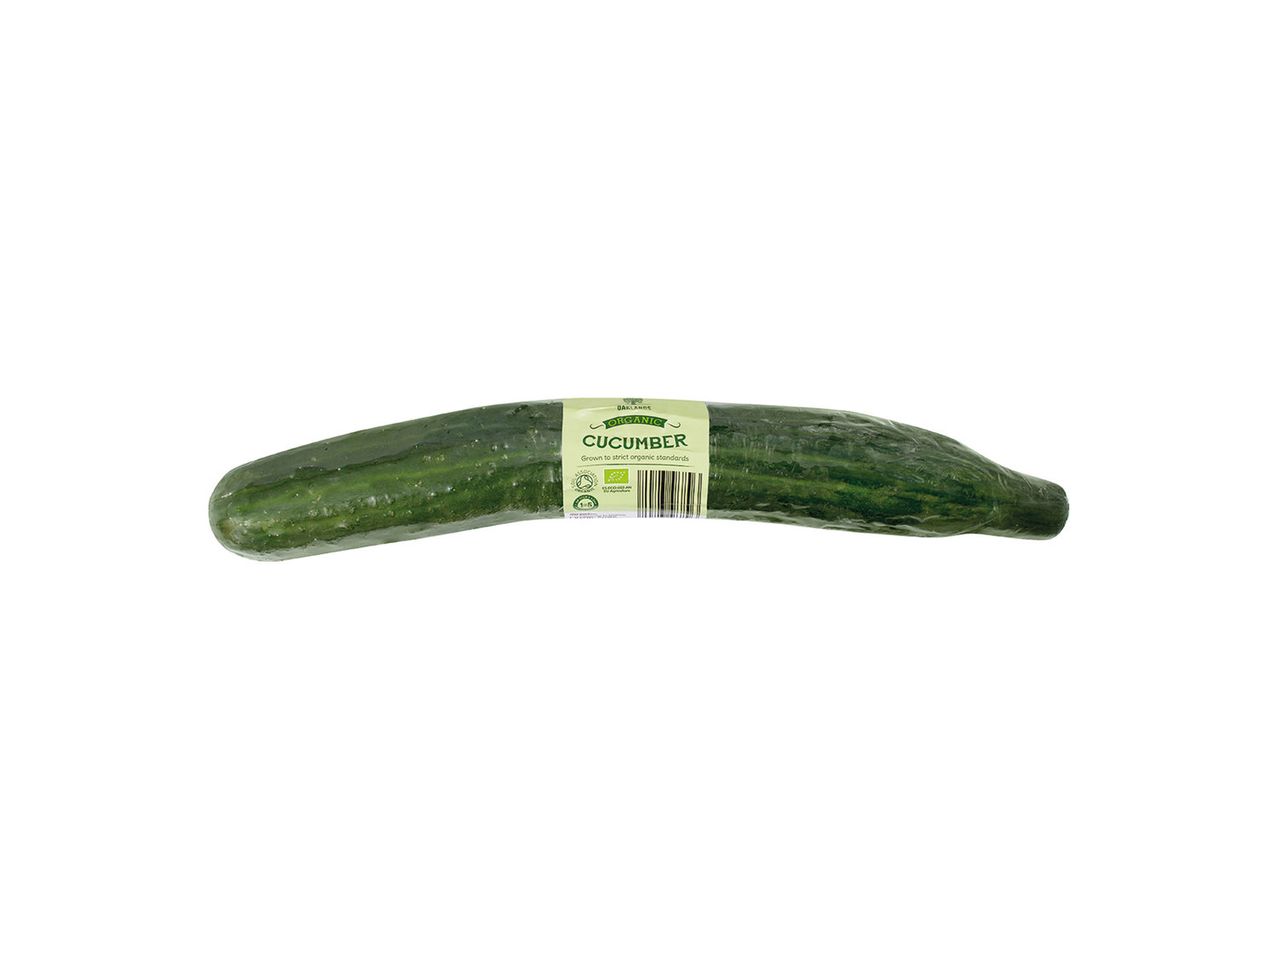 Go to full screen view: Oaklands Organic Cucumber - Image 1